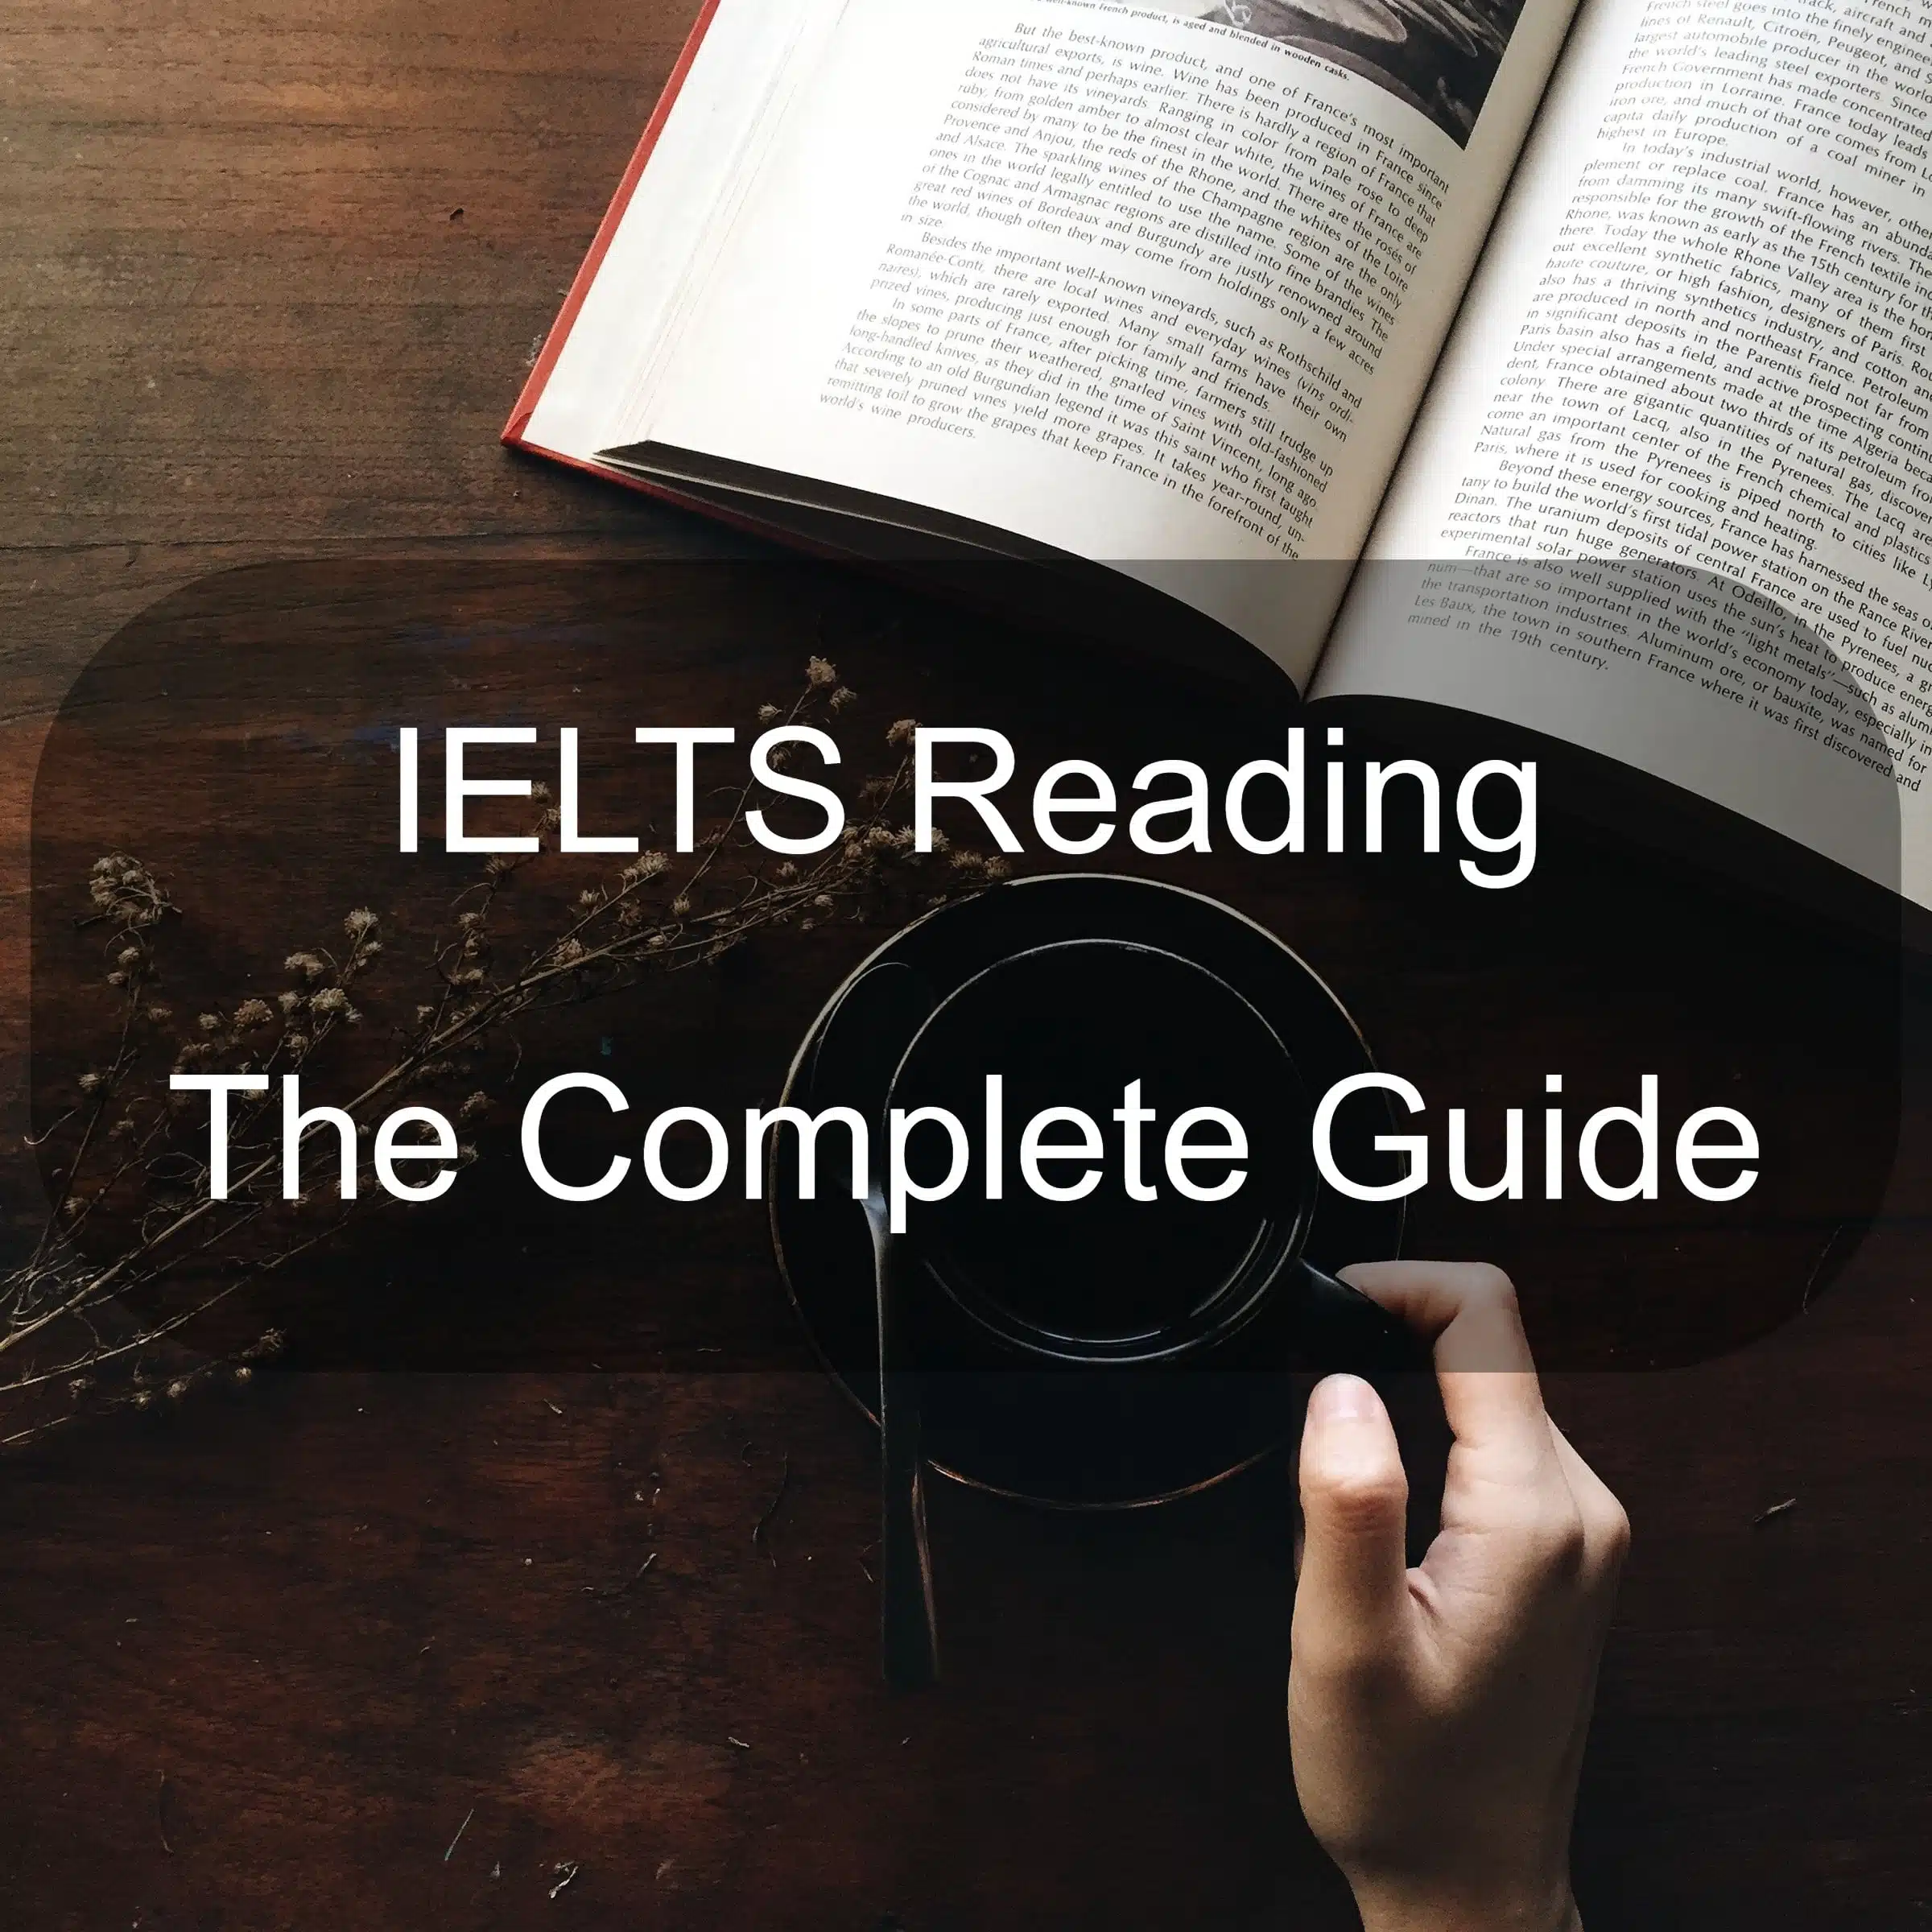 The Complete Guide to the IELTS Reading Test